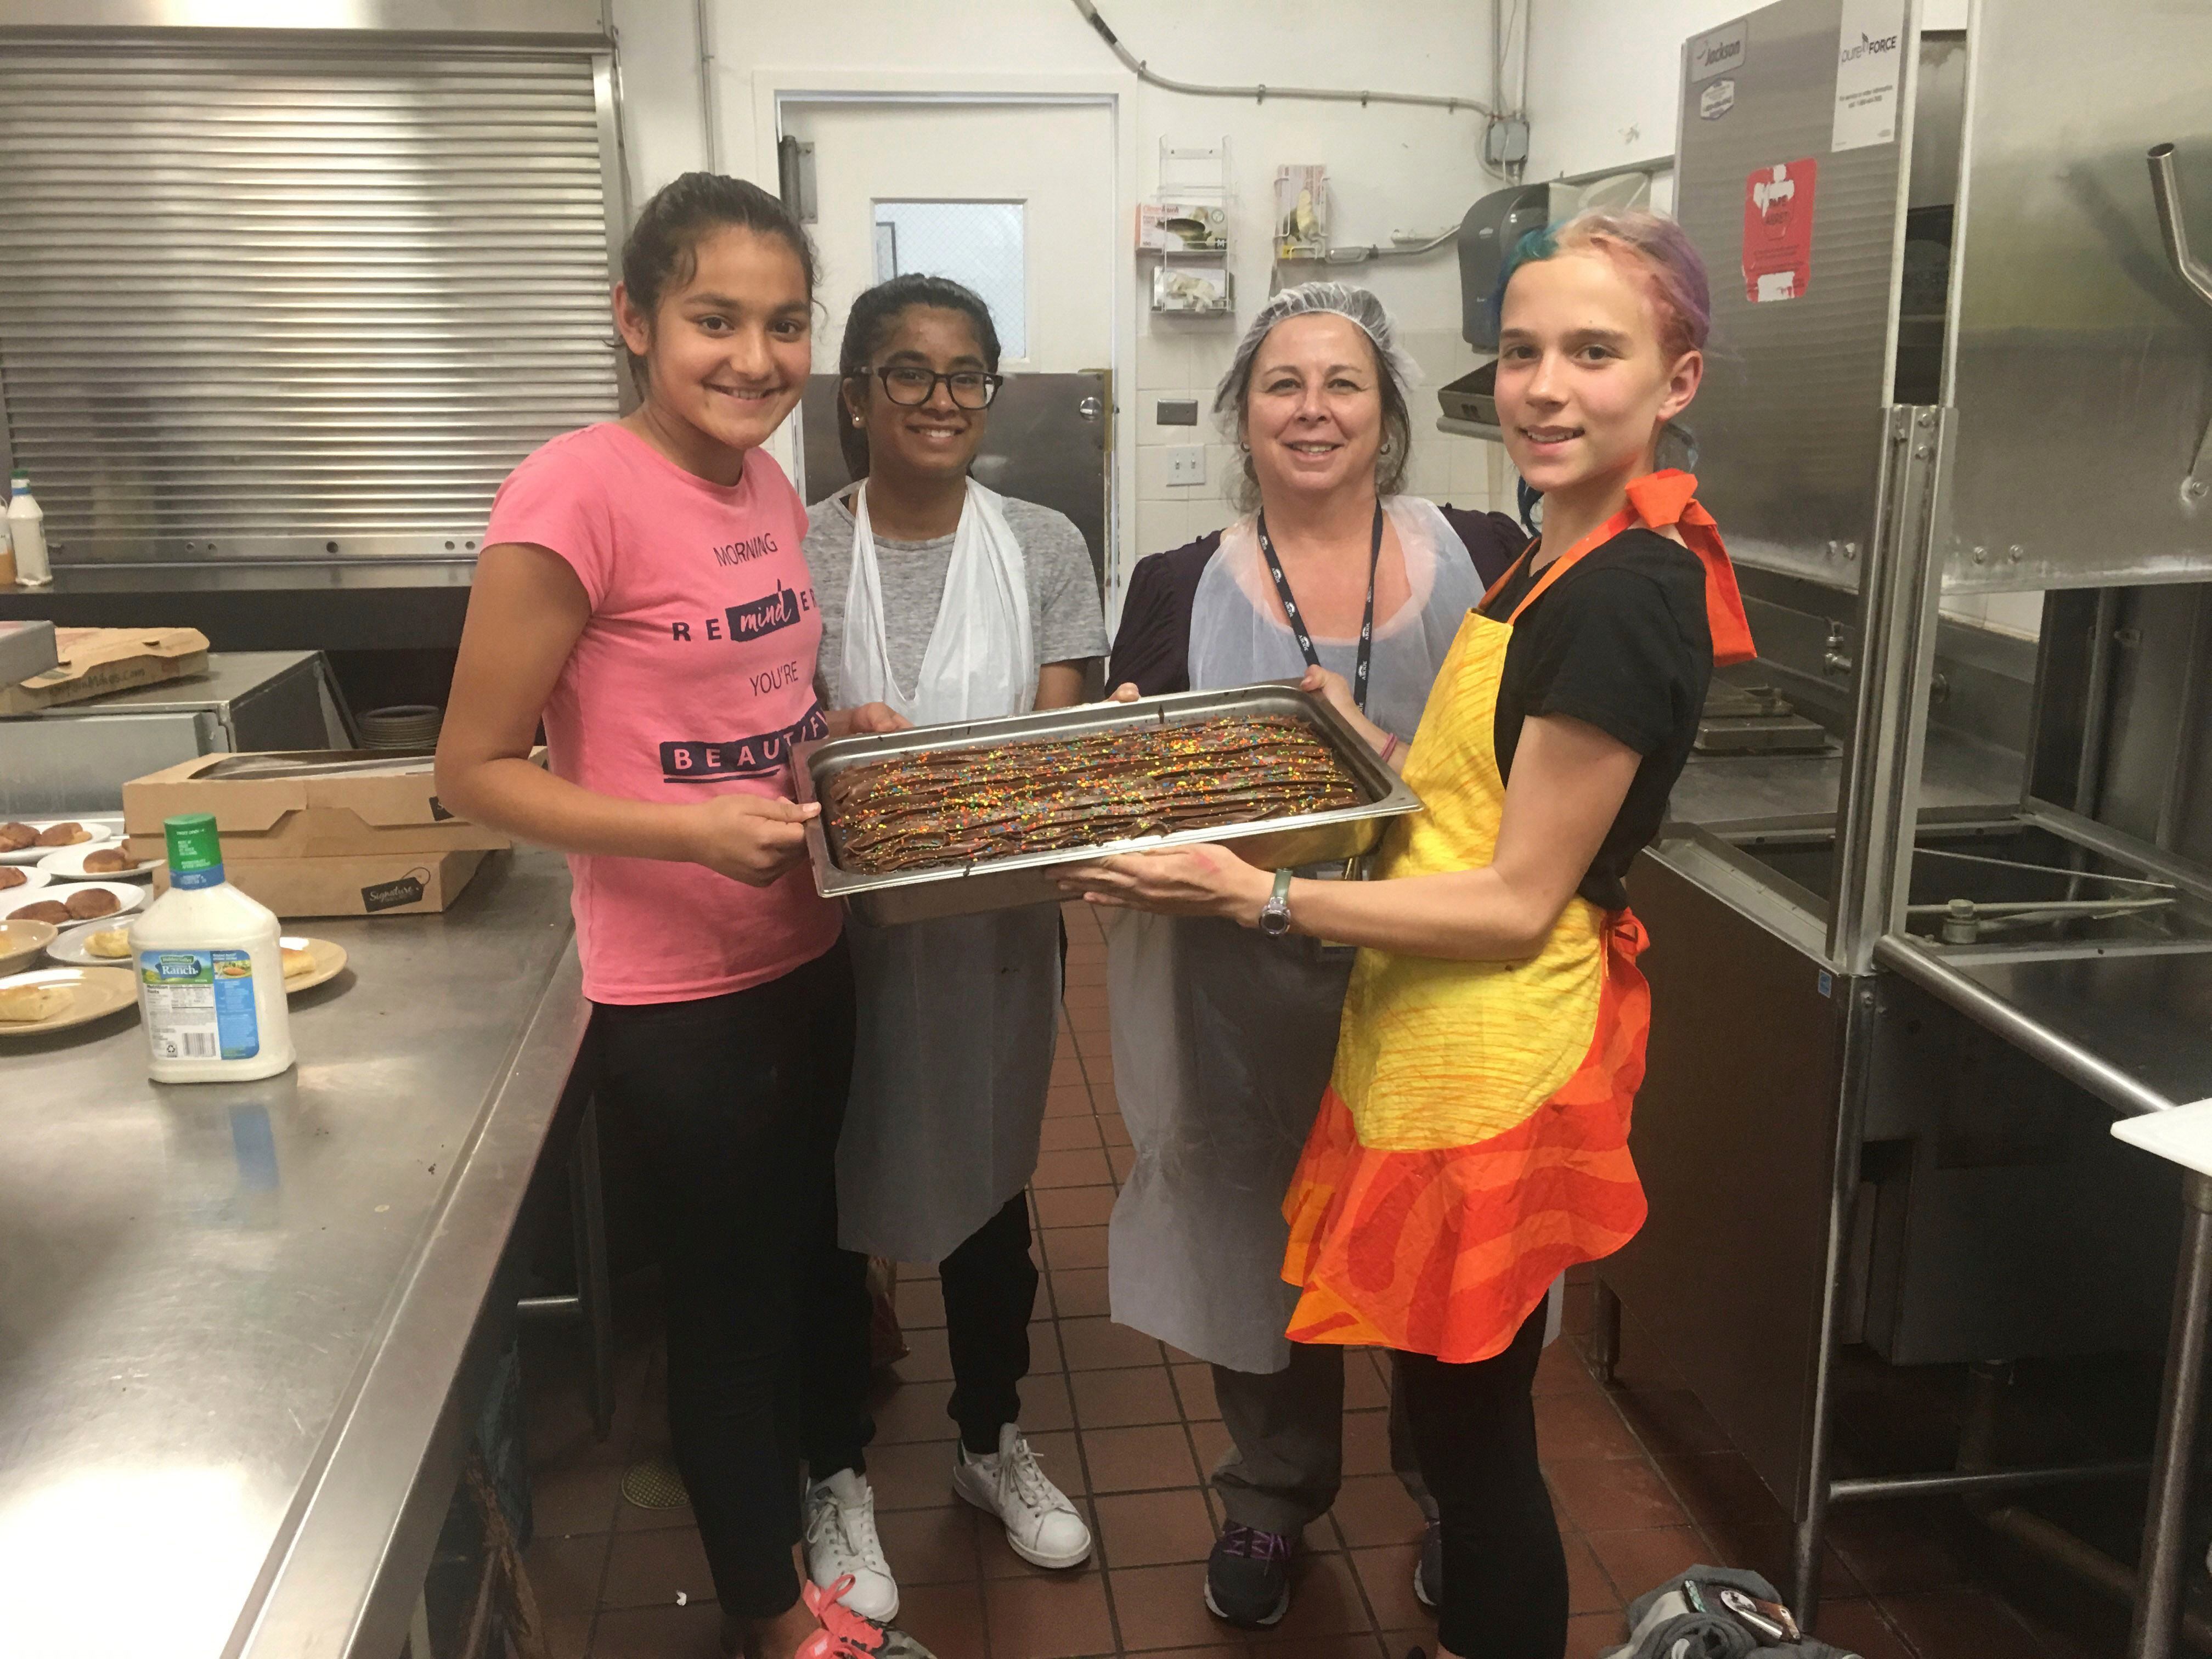 Teen baker sweetens lives making desserts for those in need